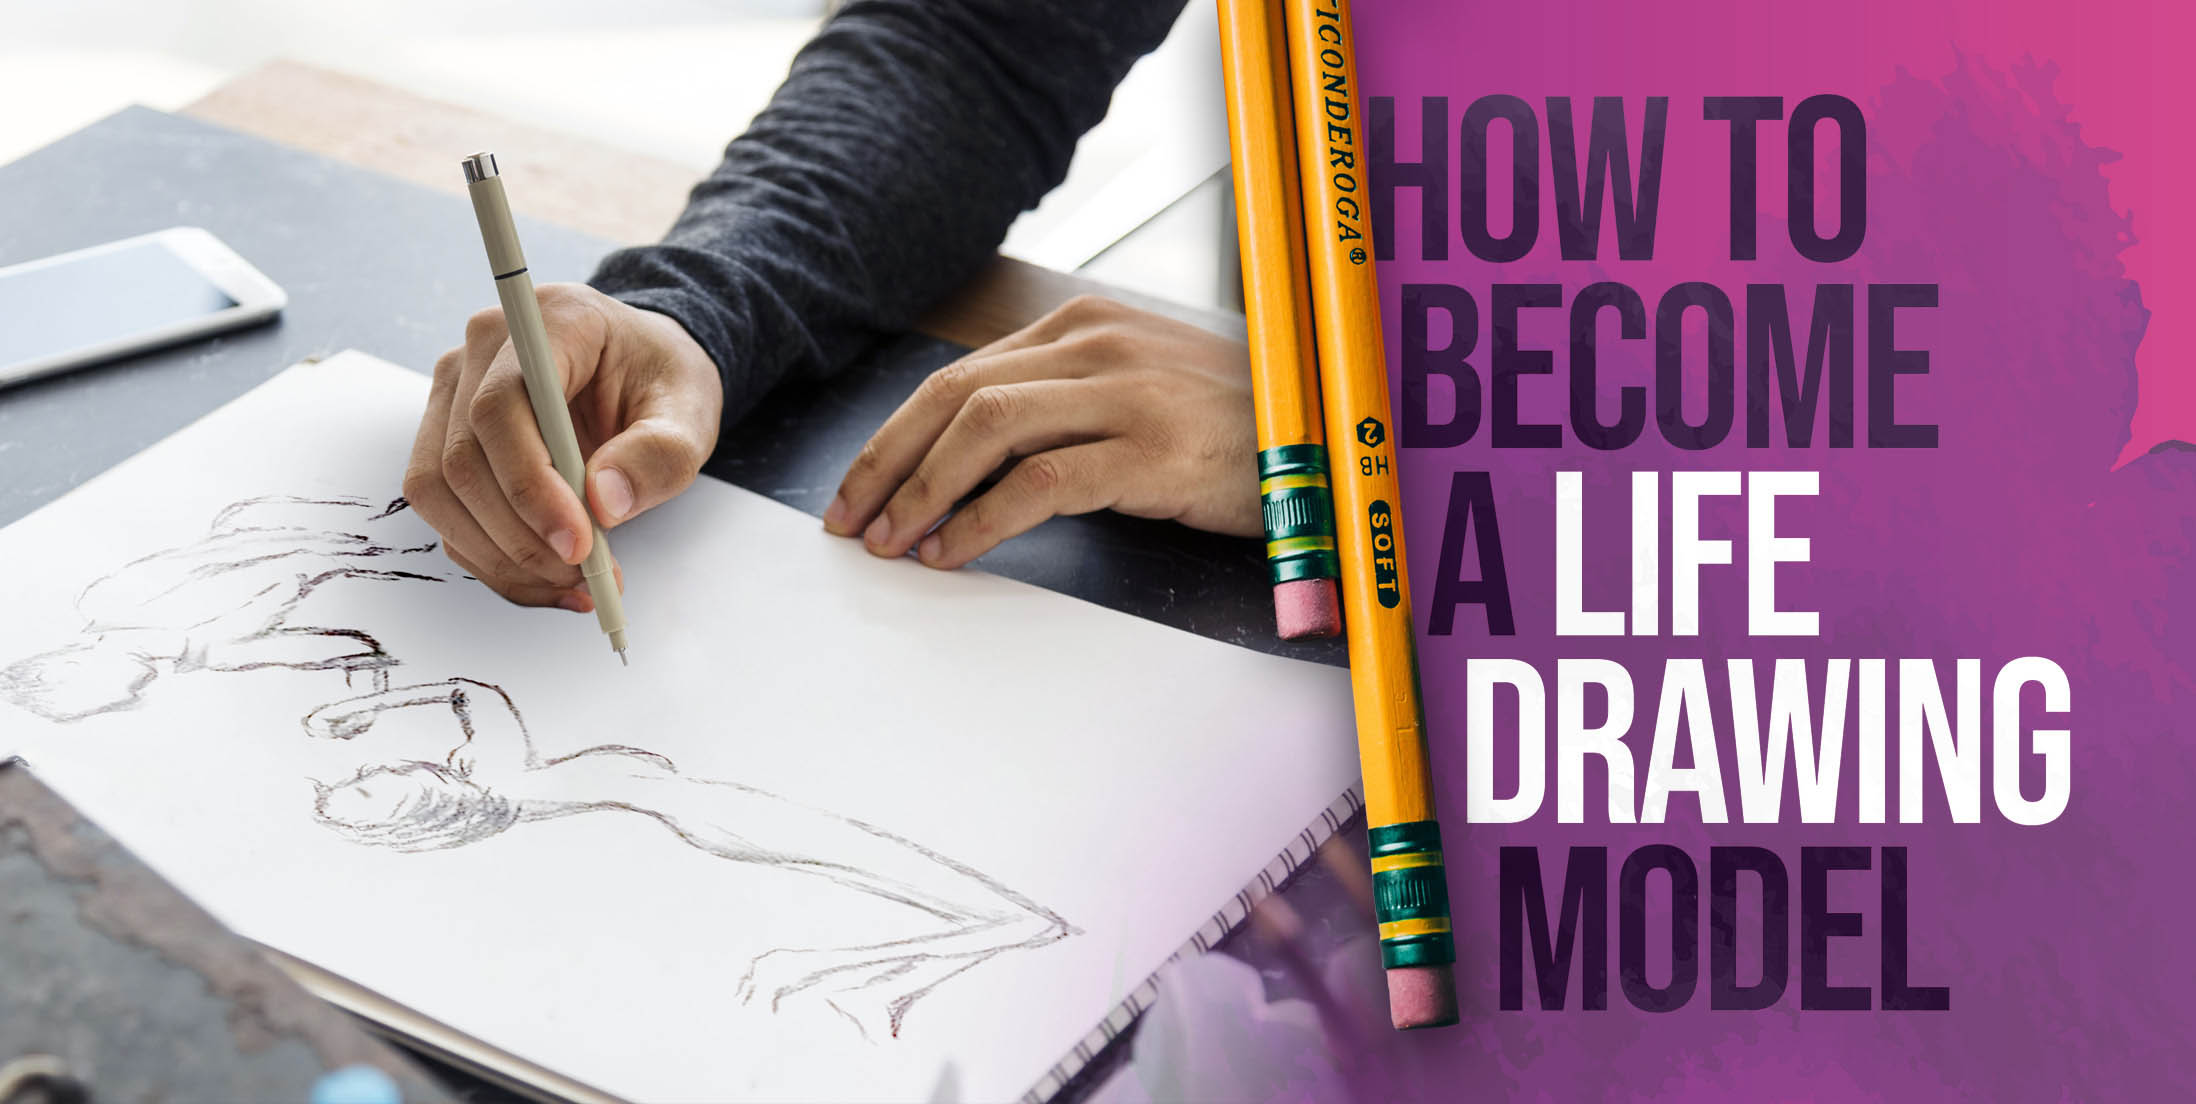 How to Become a Life Drawing Model